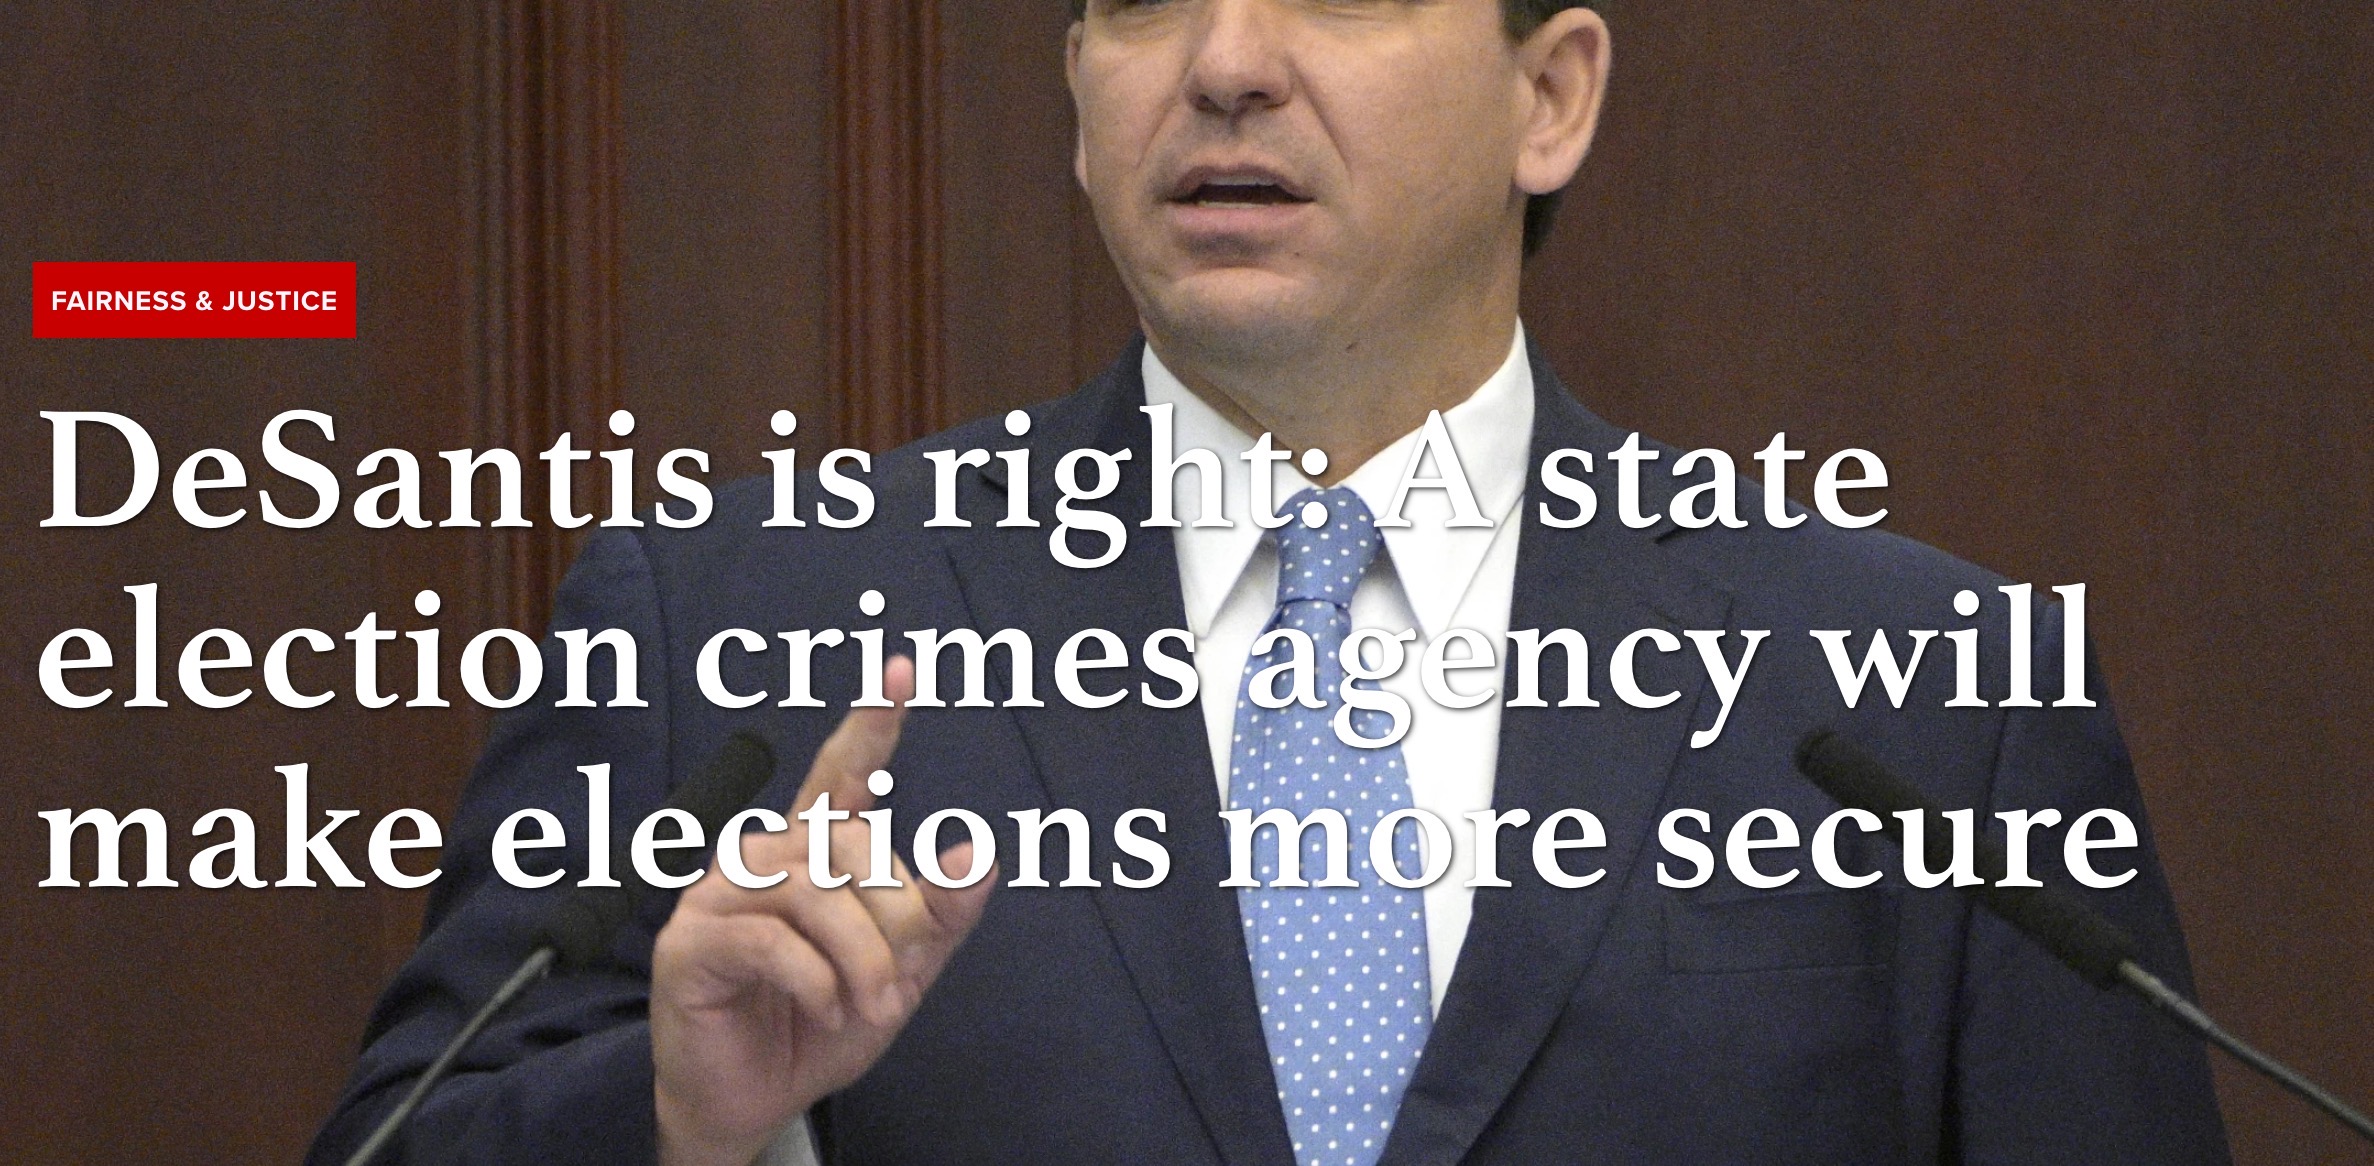 ACRUs Blackwell: DeSantis is right: A state election crimes agency will make elections more secure